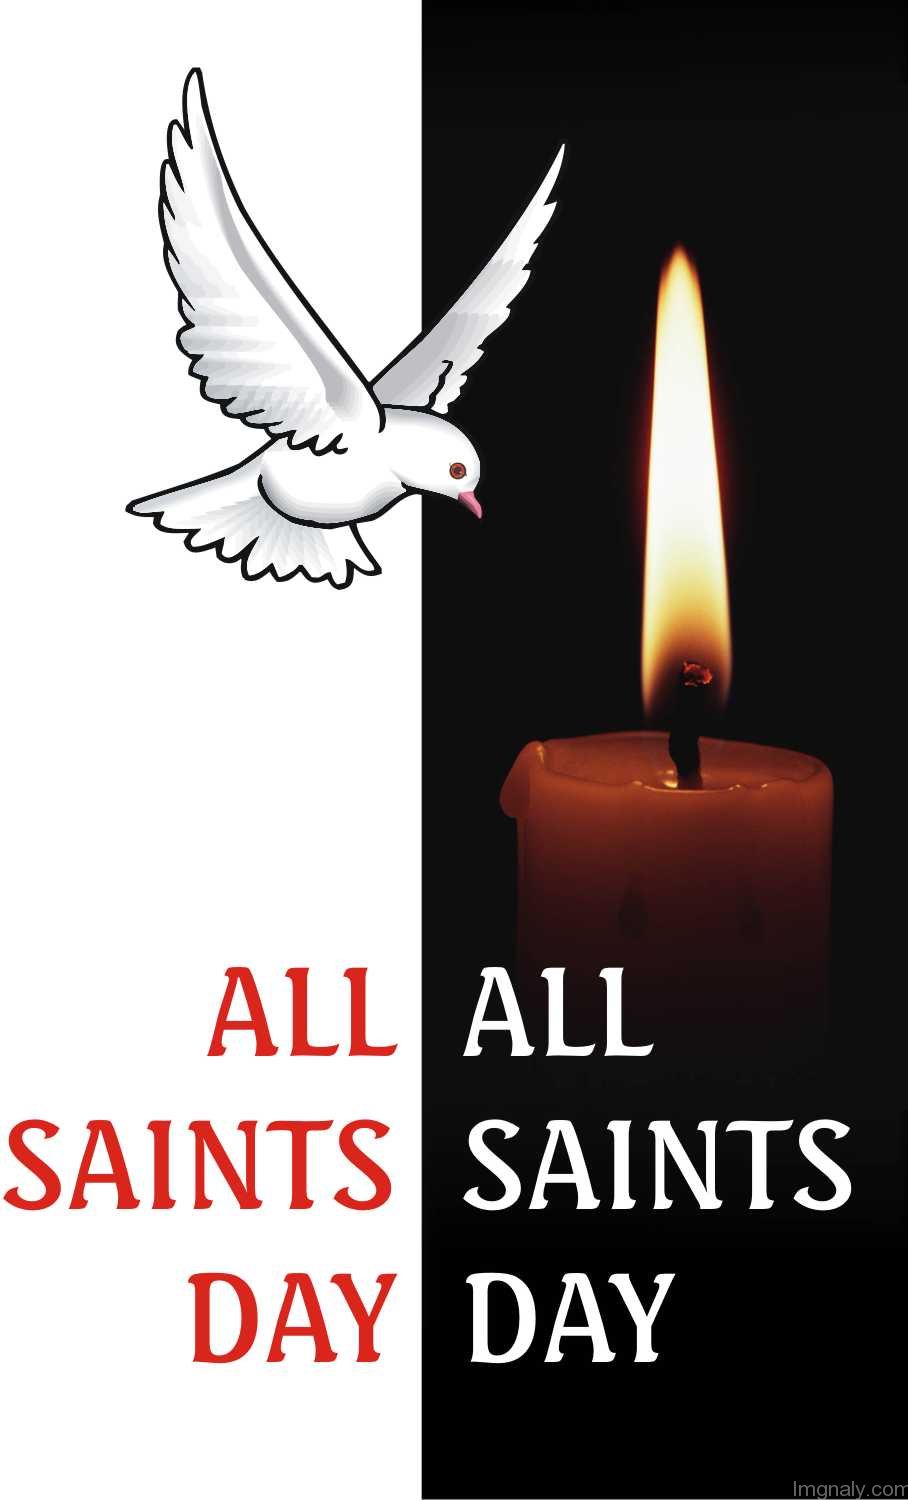 All Saints Day dove and candle picture